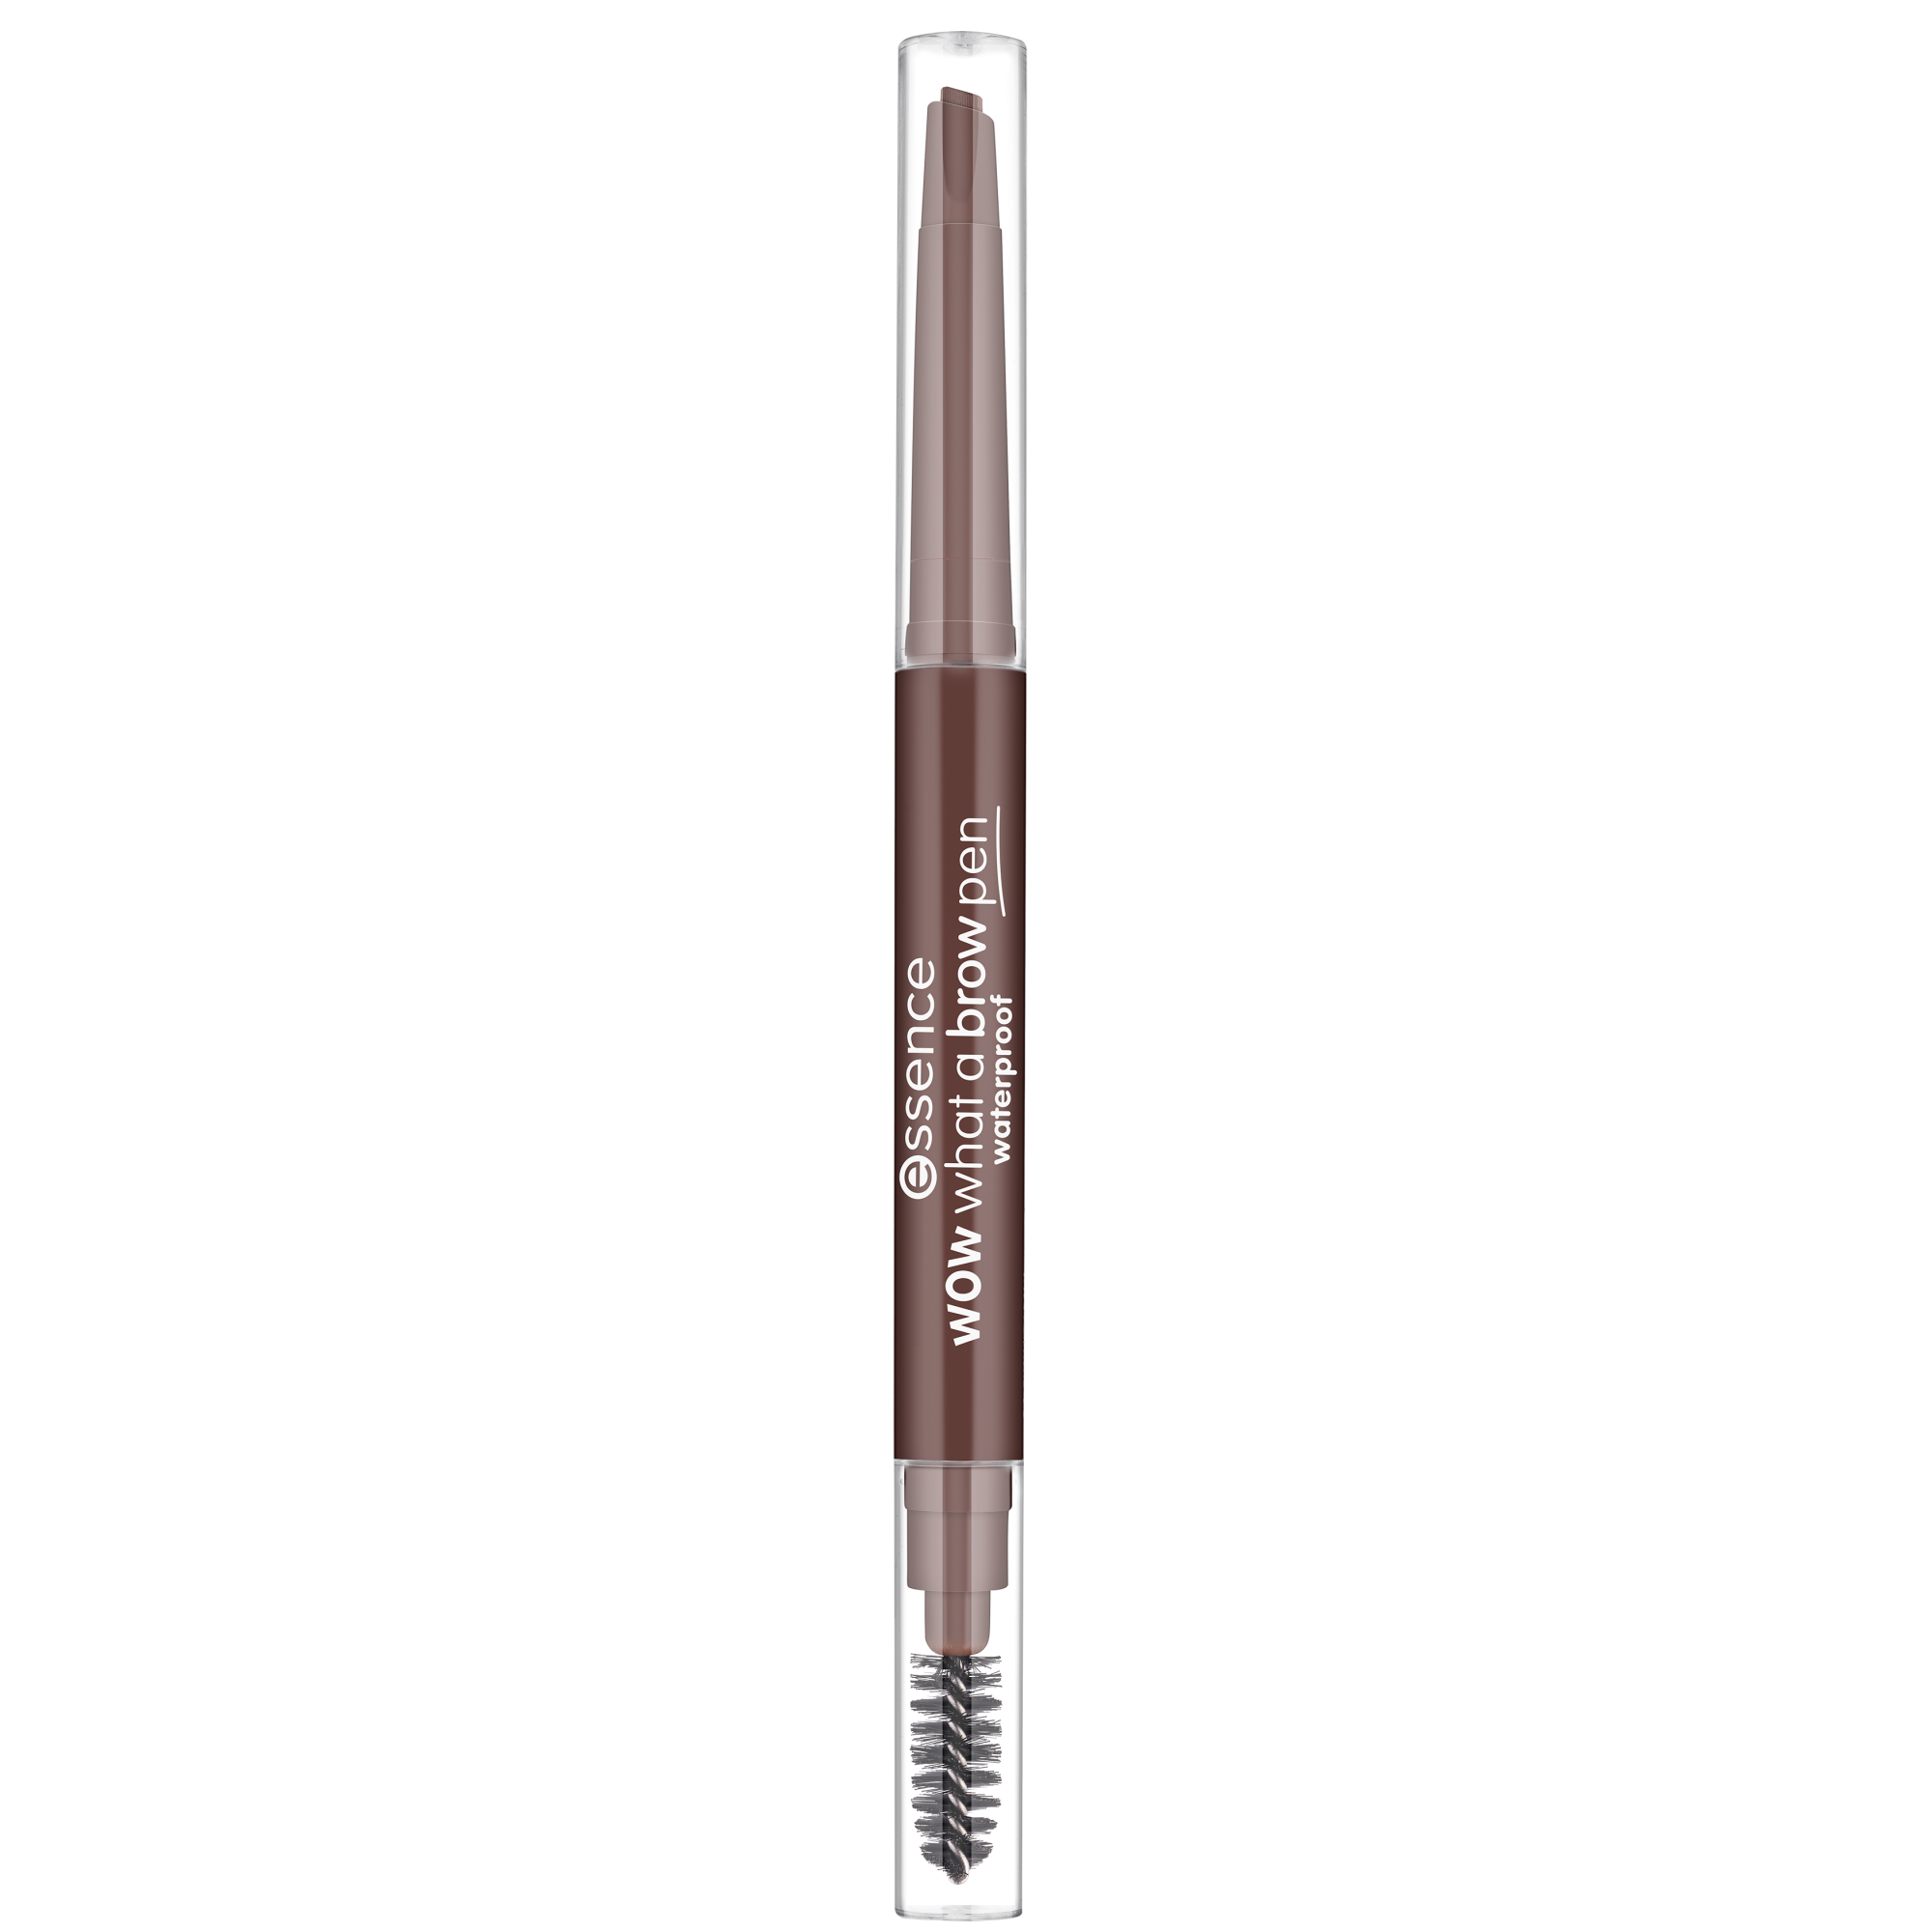 wow what a brow pen waterproof